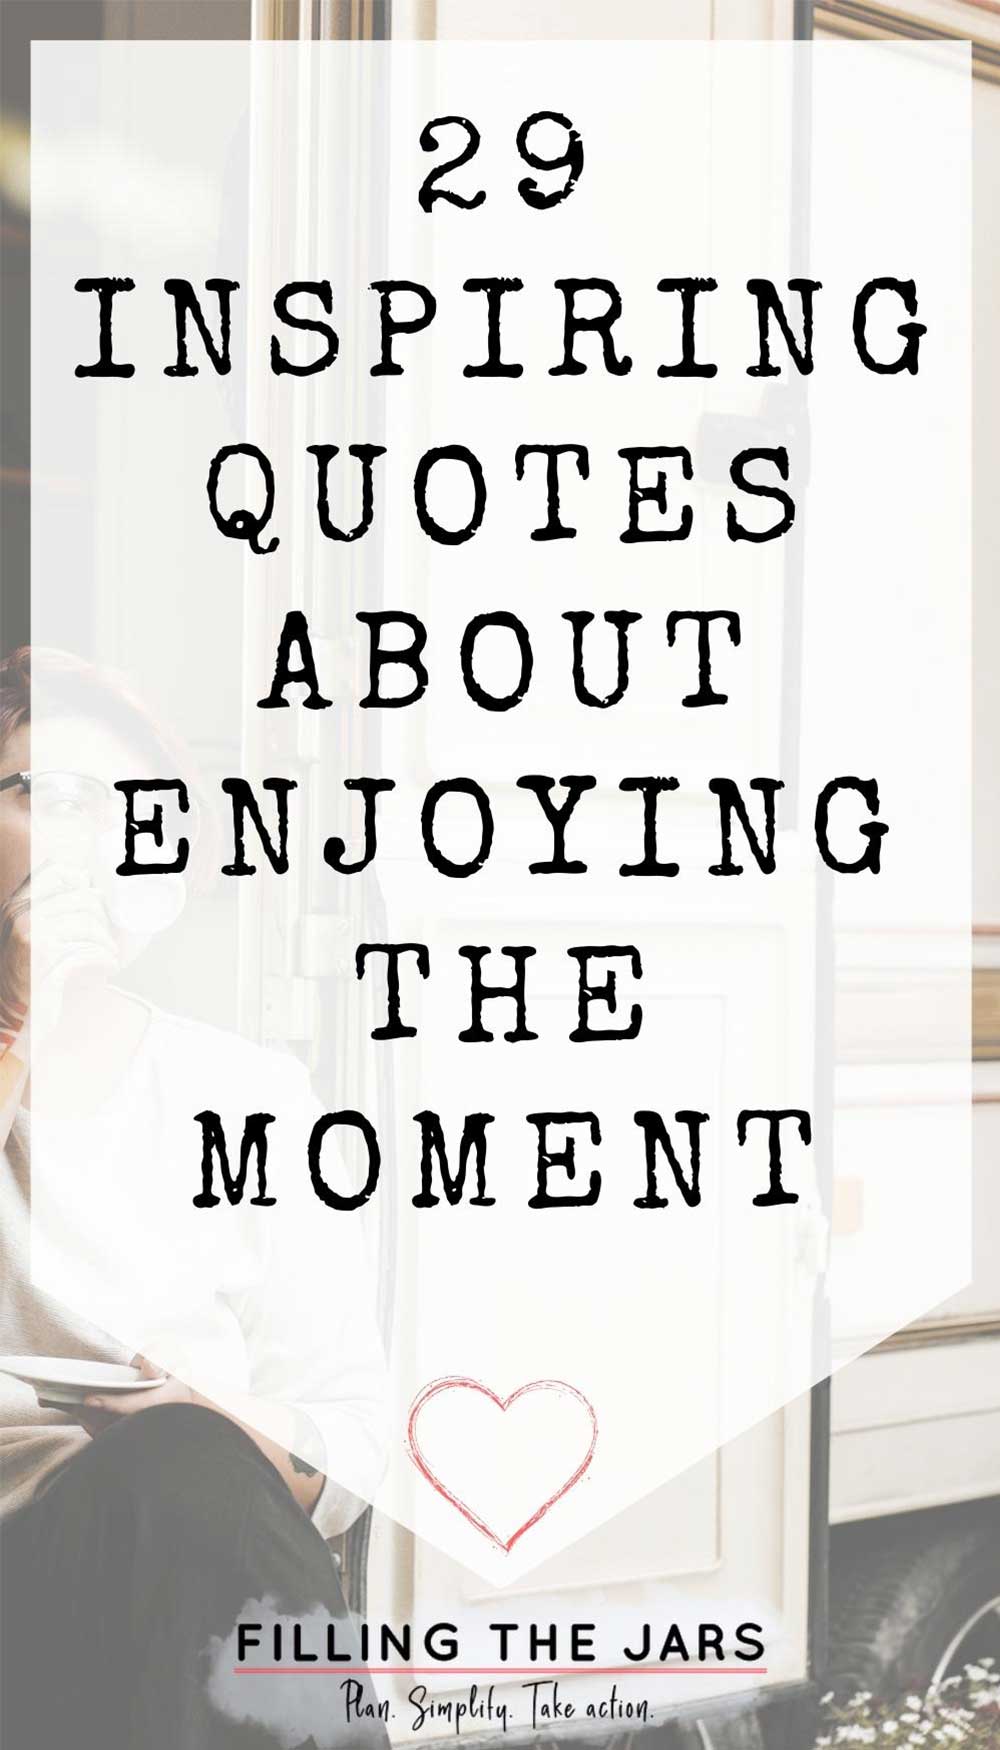 Text inspiring quotes about enjoying the moment on white background over image of female sitting on RV step sipping coffee.